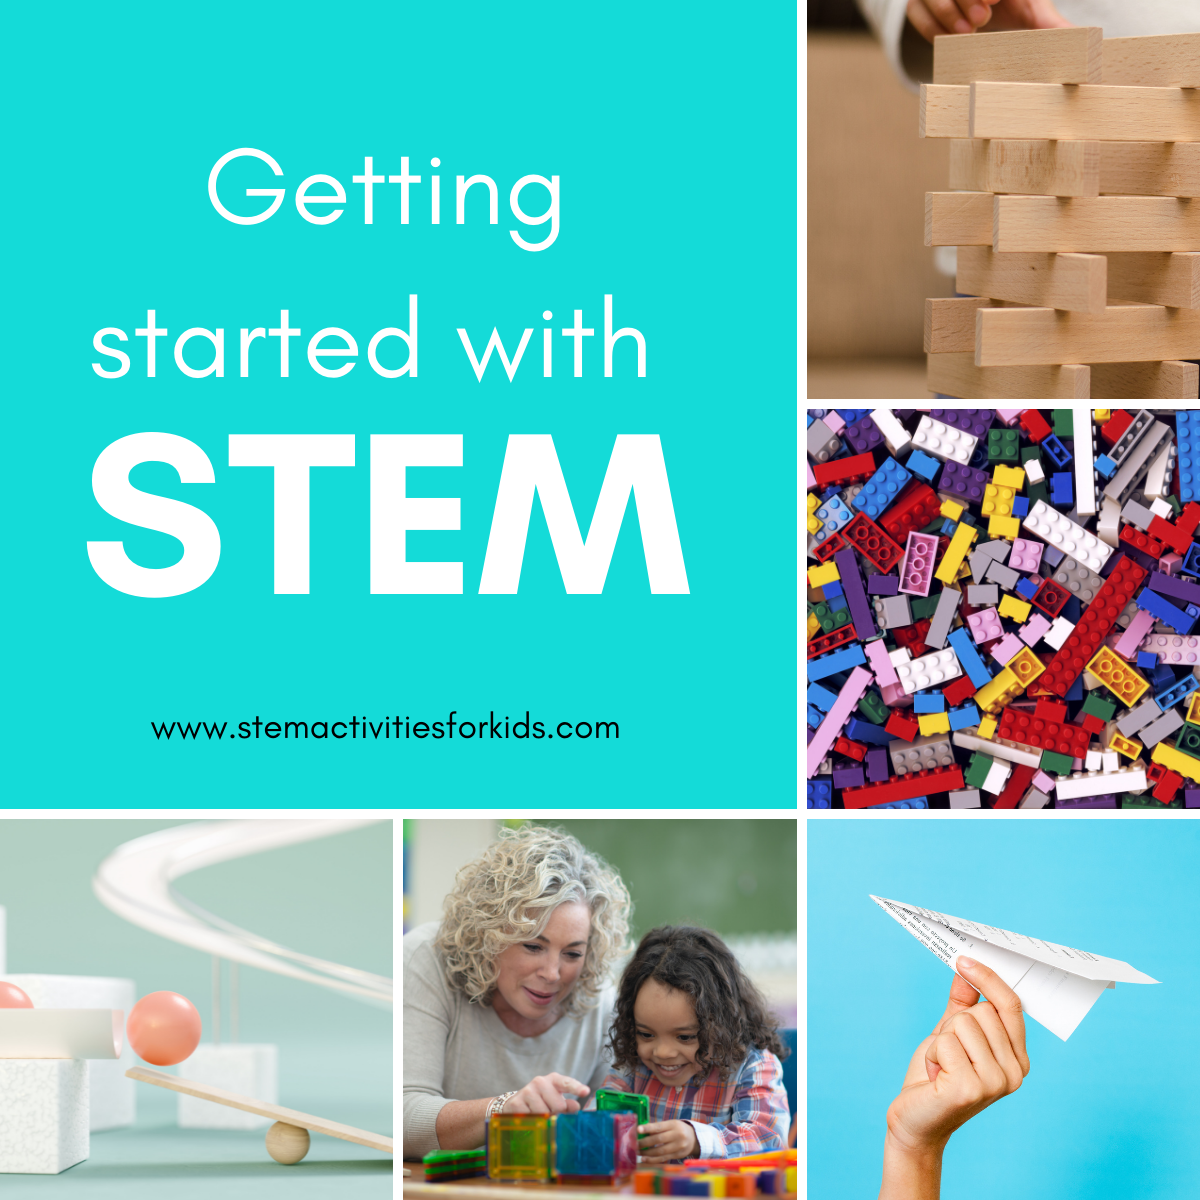 New to STEM? Here's how to get started.